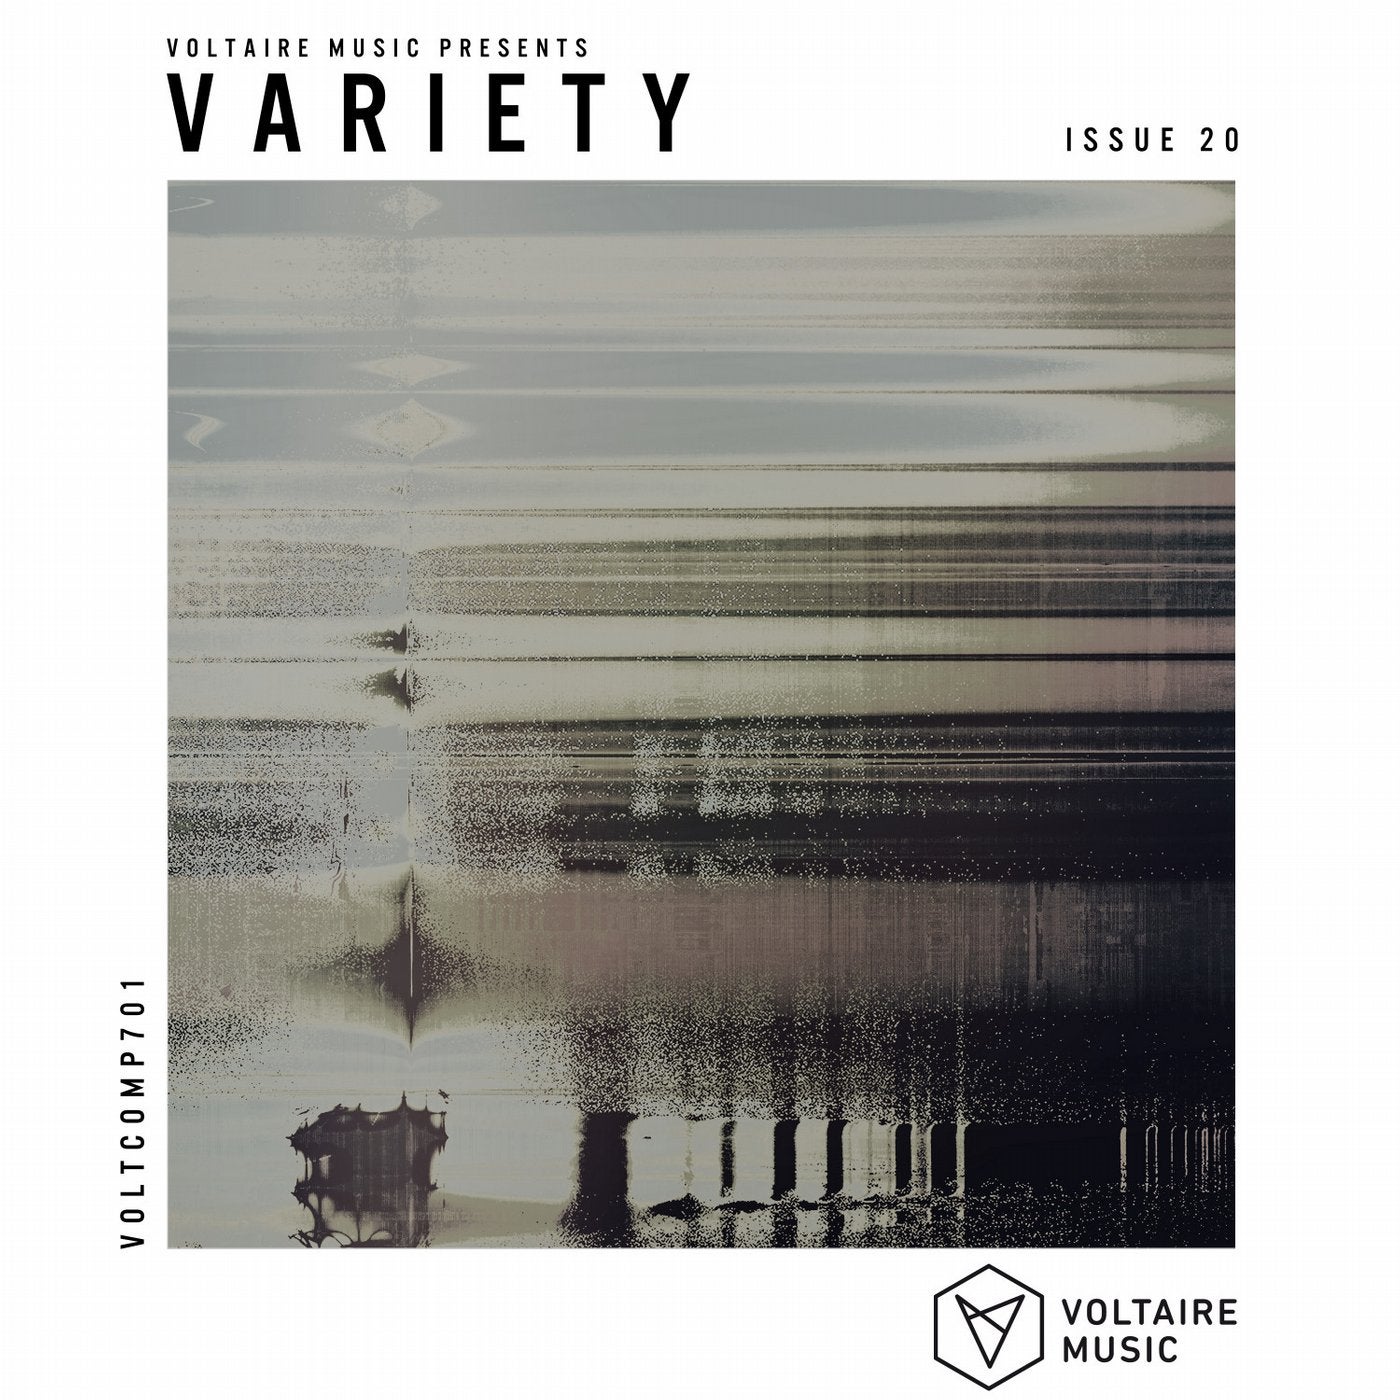 Voltaire Music pres. Variety Issue 20